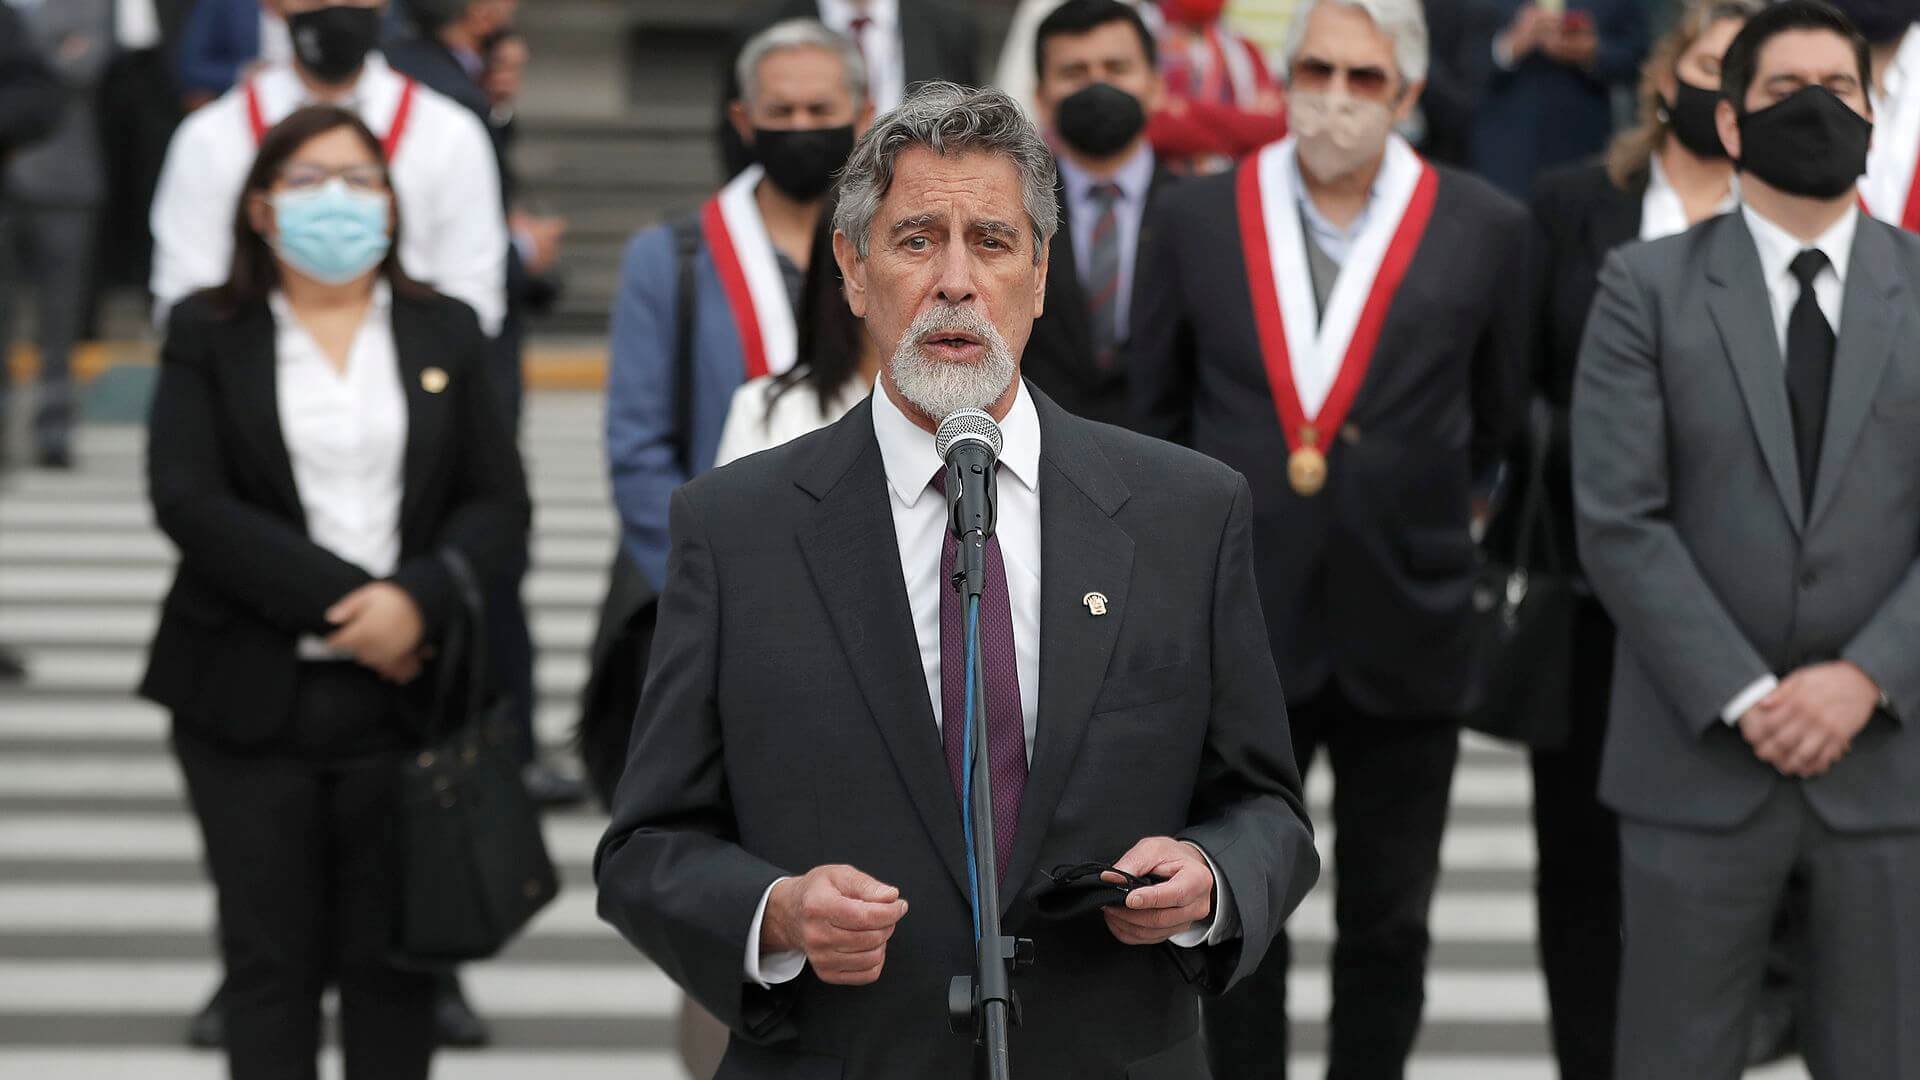 Interim Leader Merino Resigns After Five Days, Giving Peru its Third President in a Week